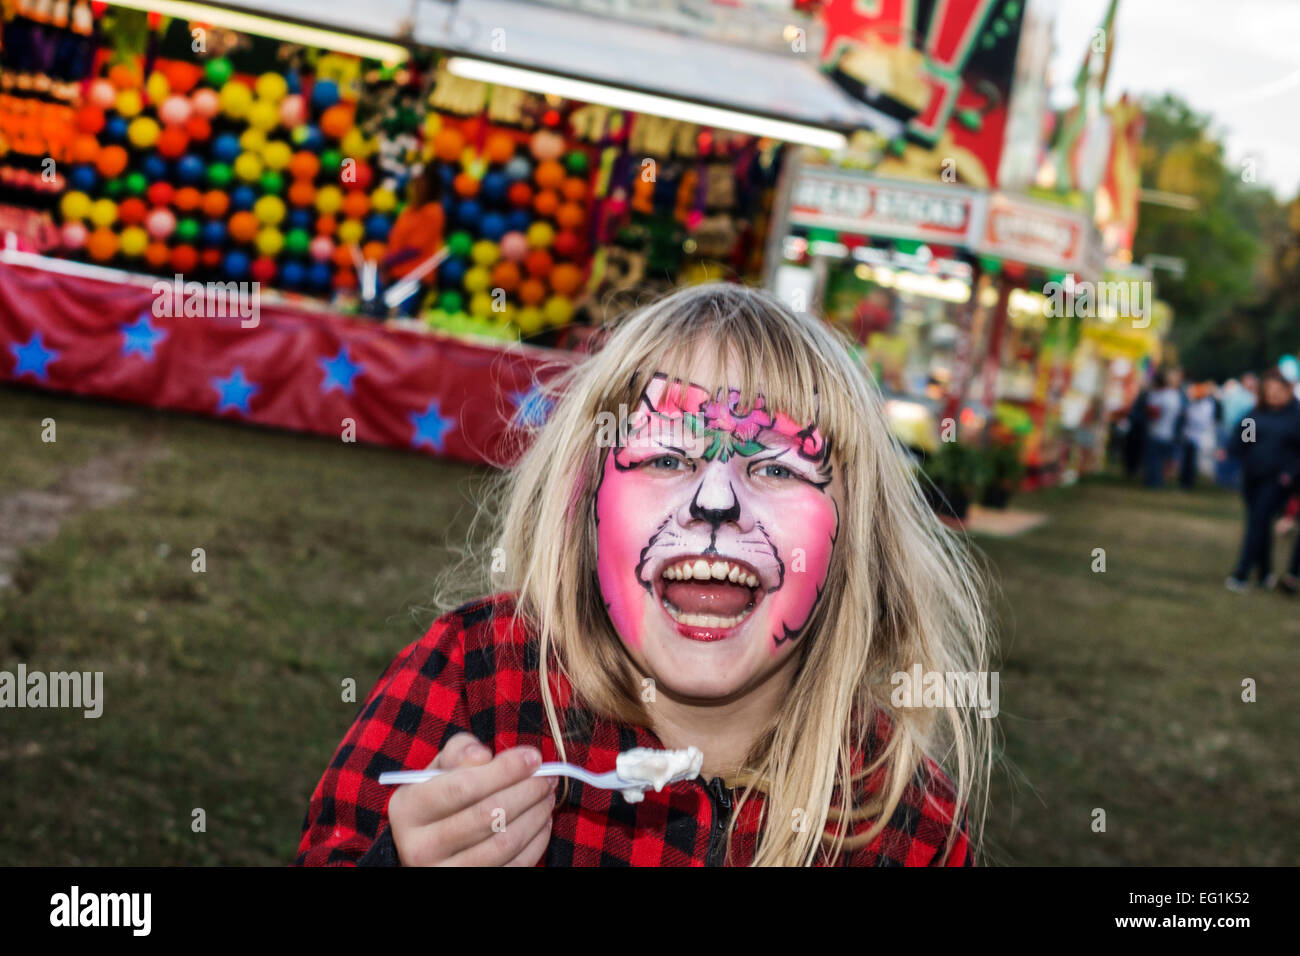 Florida Fellsmere,Frog Leg Festival,carnival,midway,girl girls,youngster youngsters youth youths female kid kids child children,face painting,eating,i Stock Photo